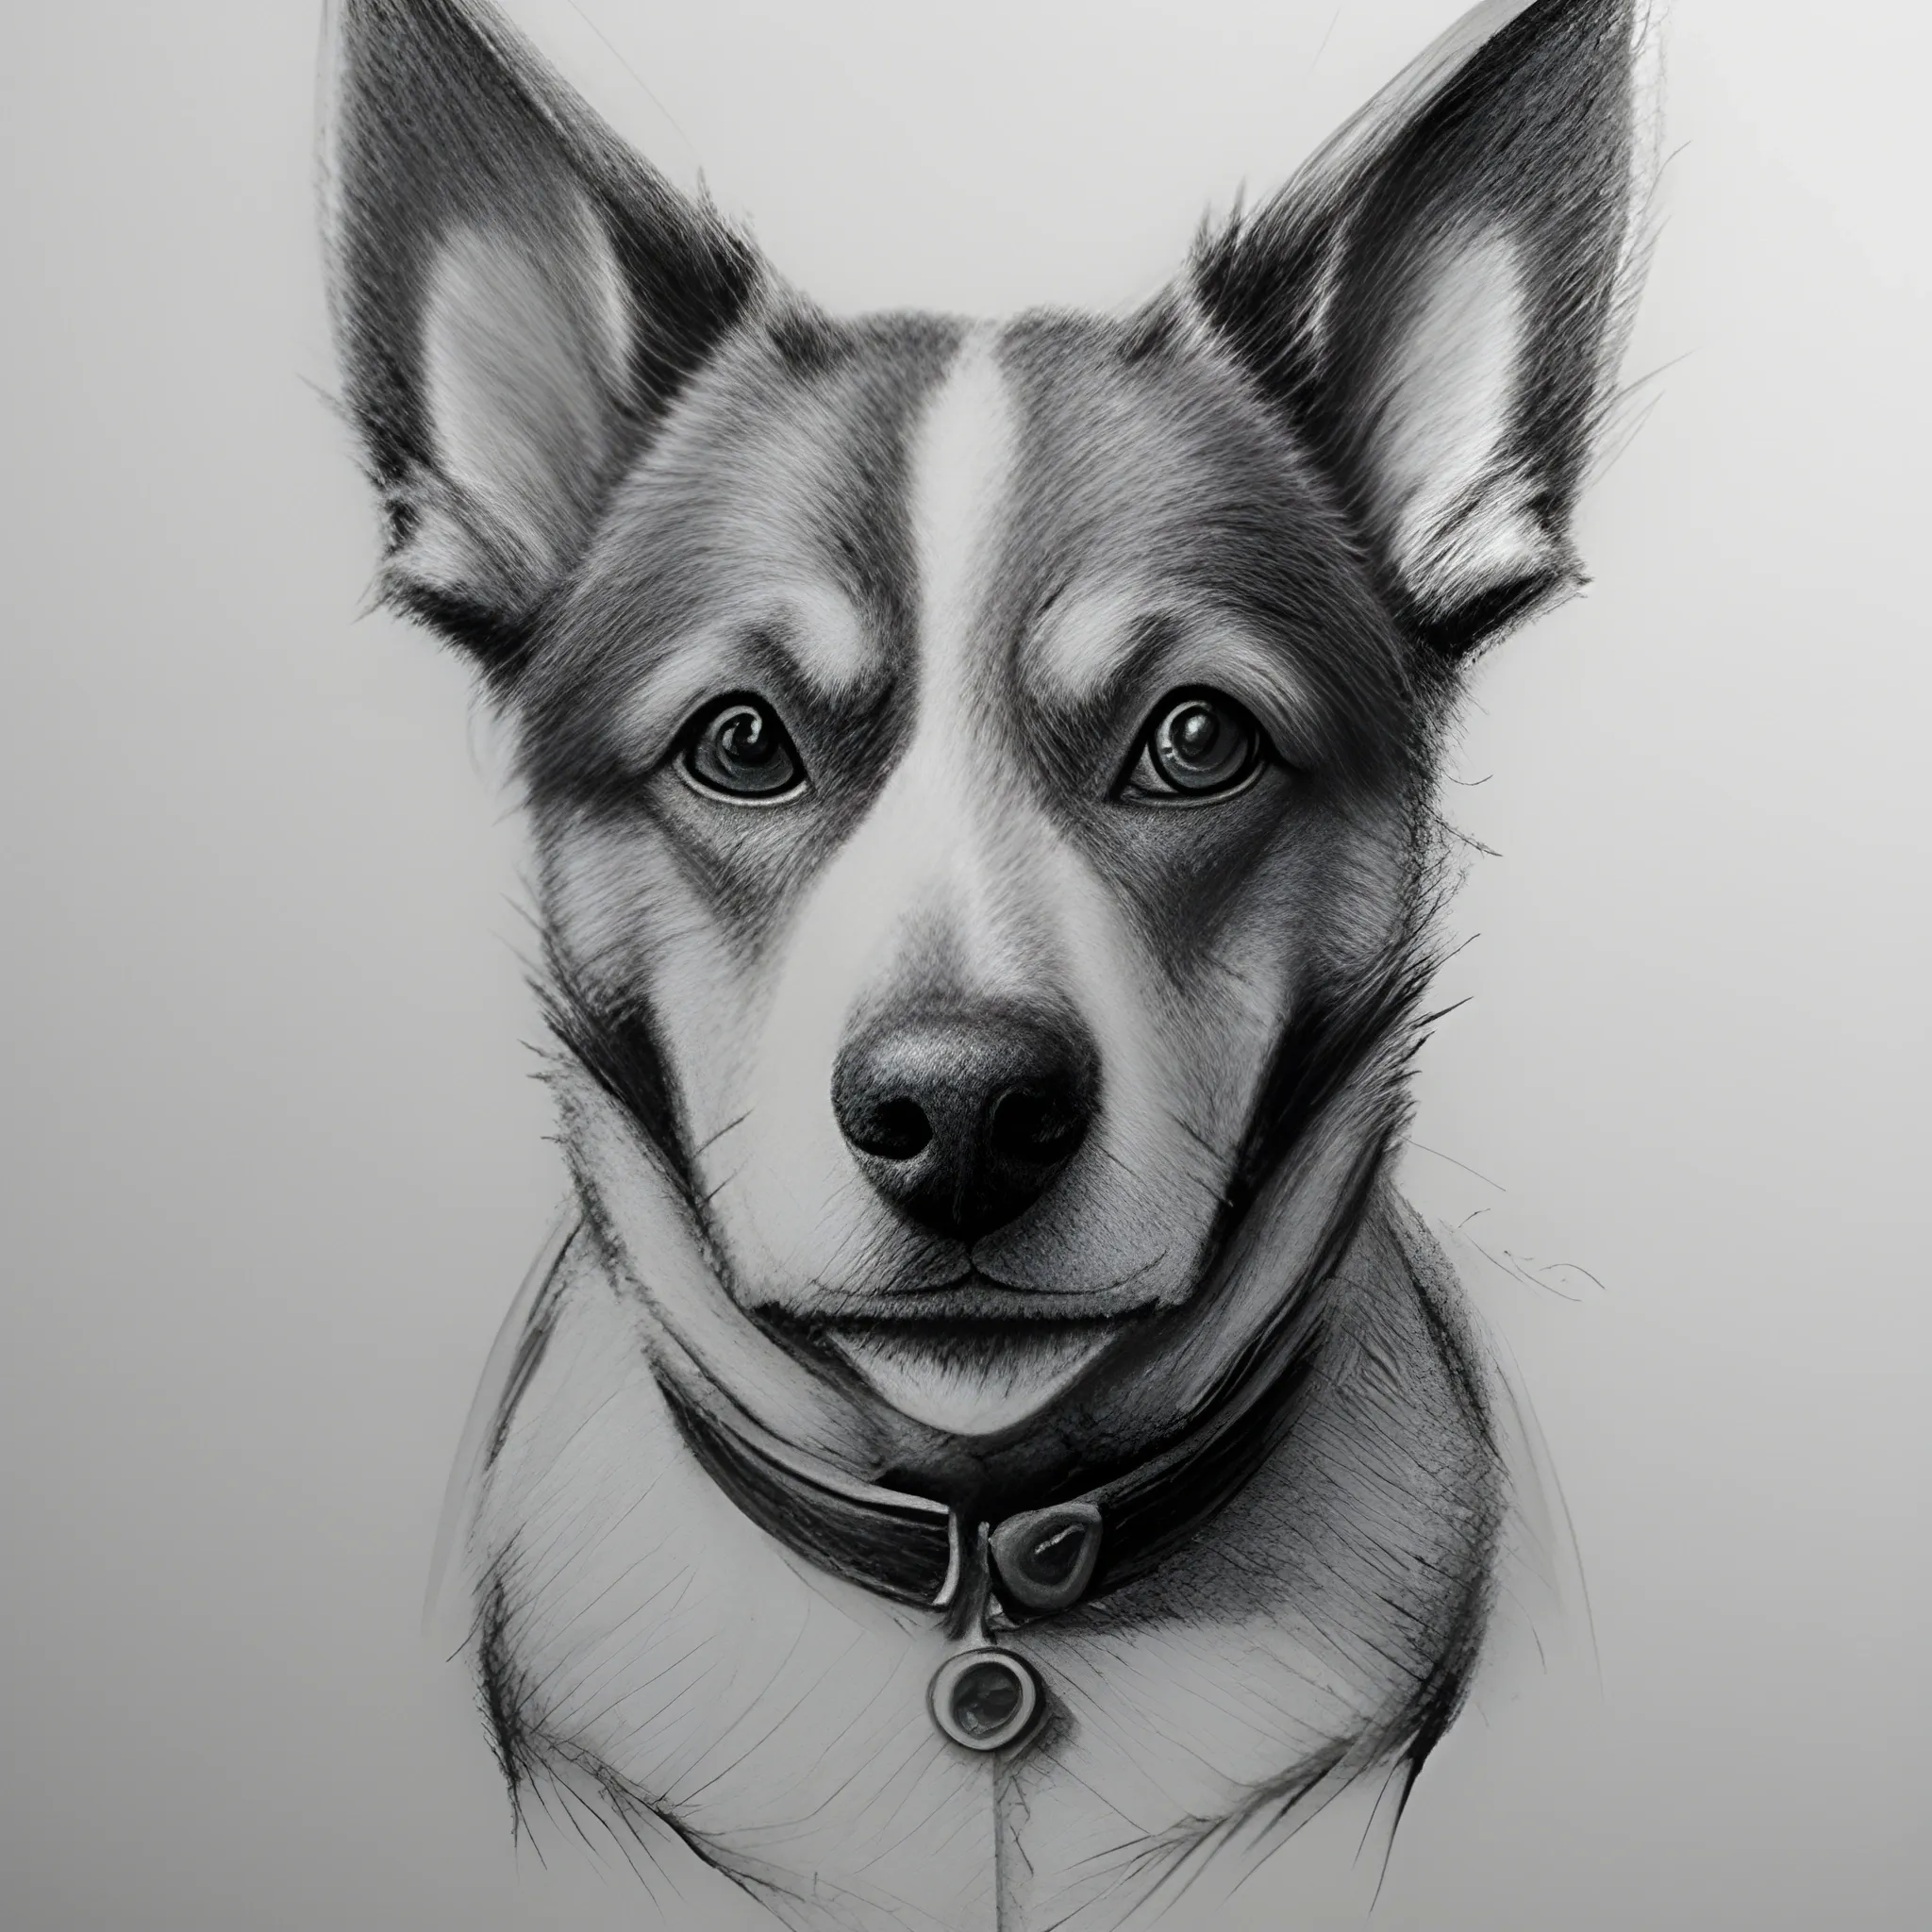 How to Draw a Husky Drawing Easy  Cute Siberian Husky Sketch Step by Step   YouTube